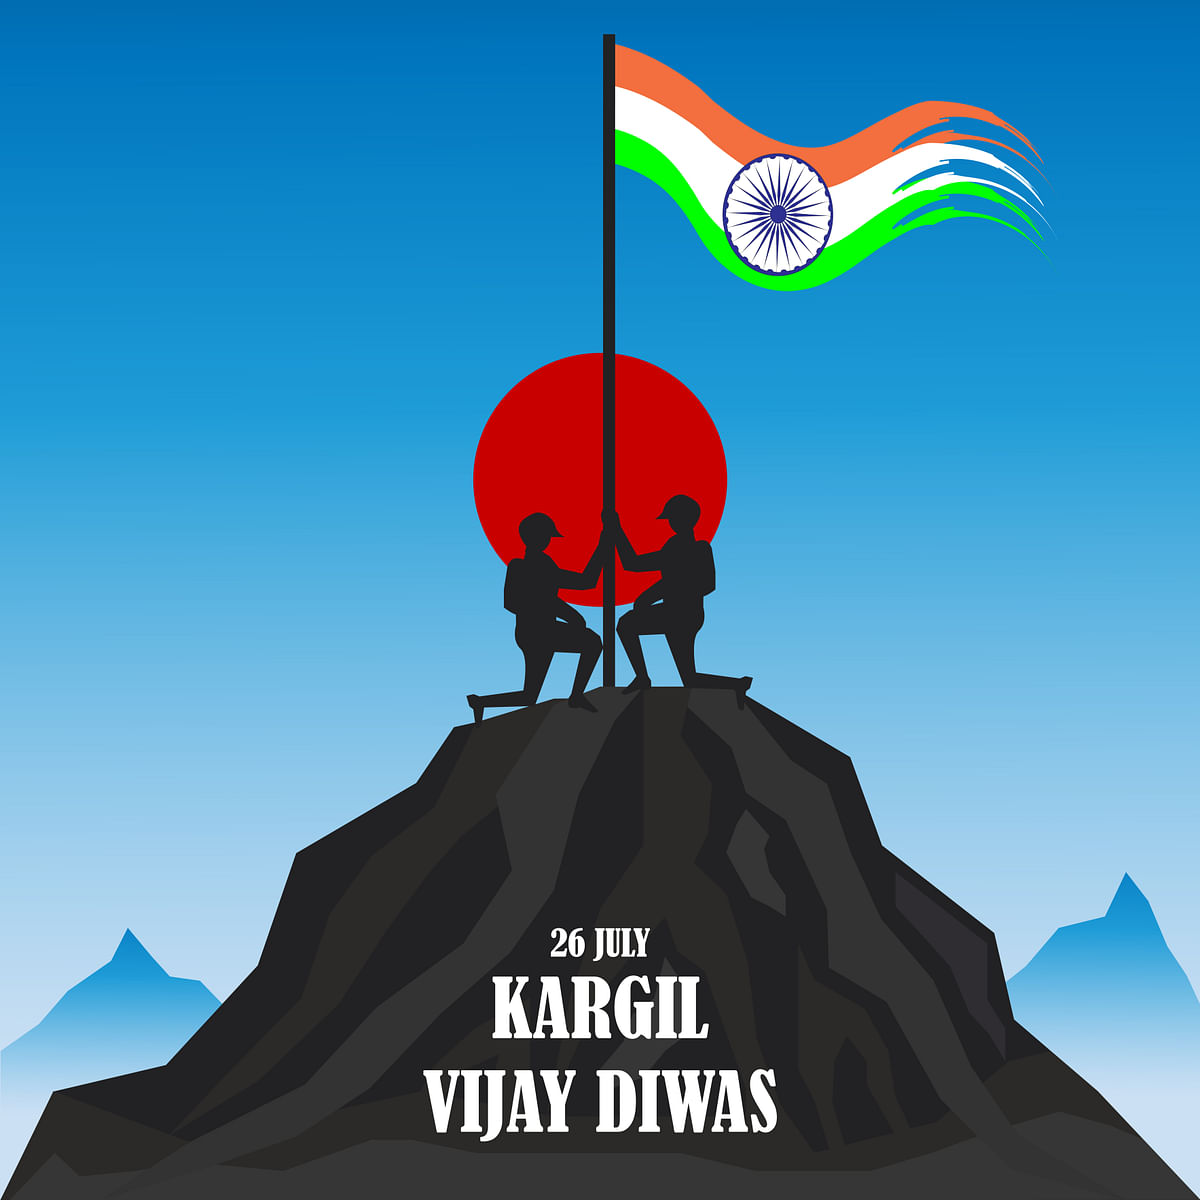 Here are some greetings, wishes, images, quotes for you to share this Kargil Vijay Diwas.